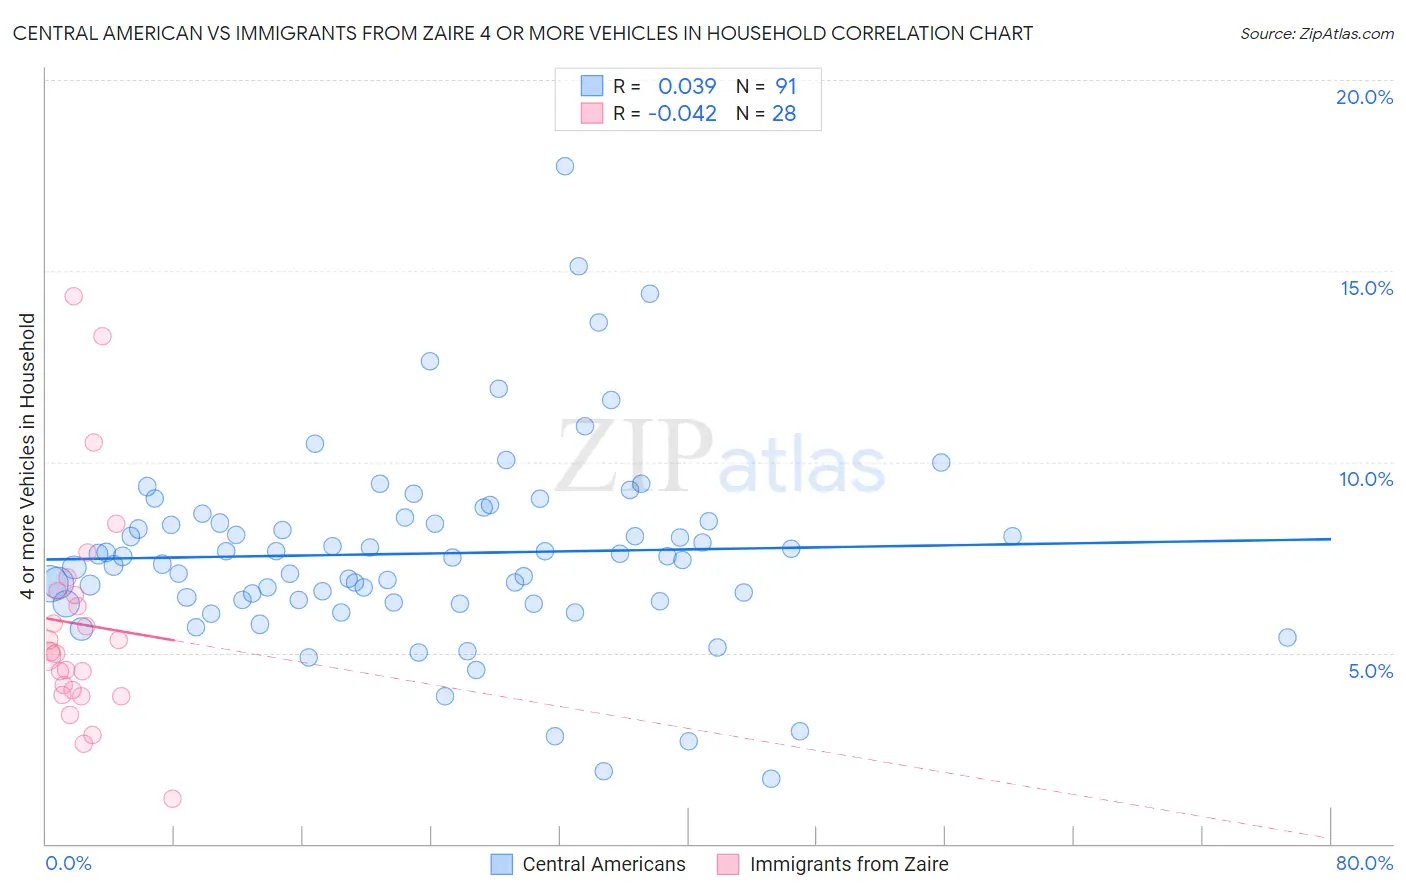 Central American vs Immigrants from Zaire 4 or more Vehicles in Household